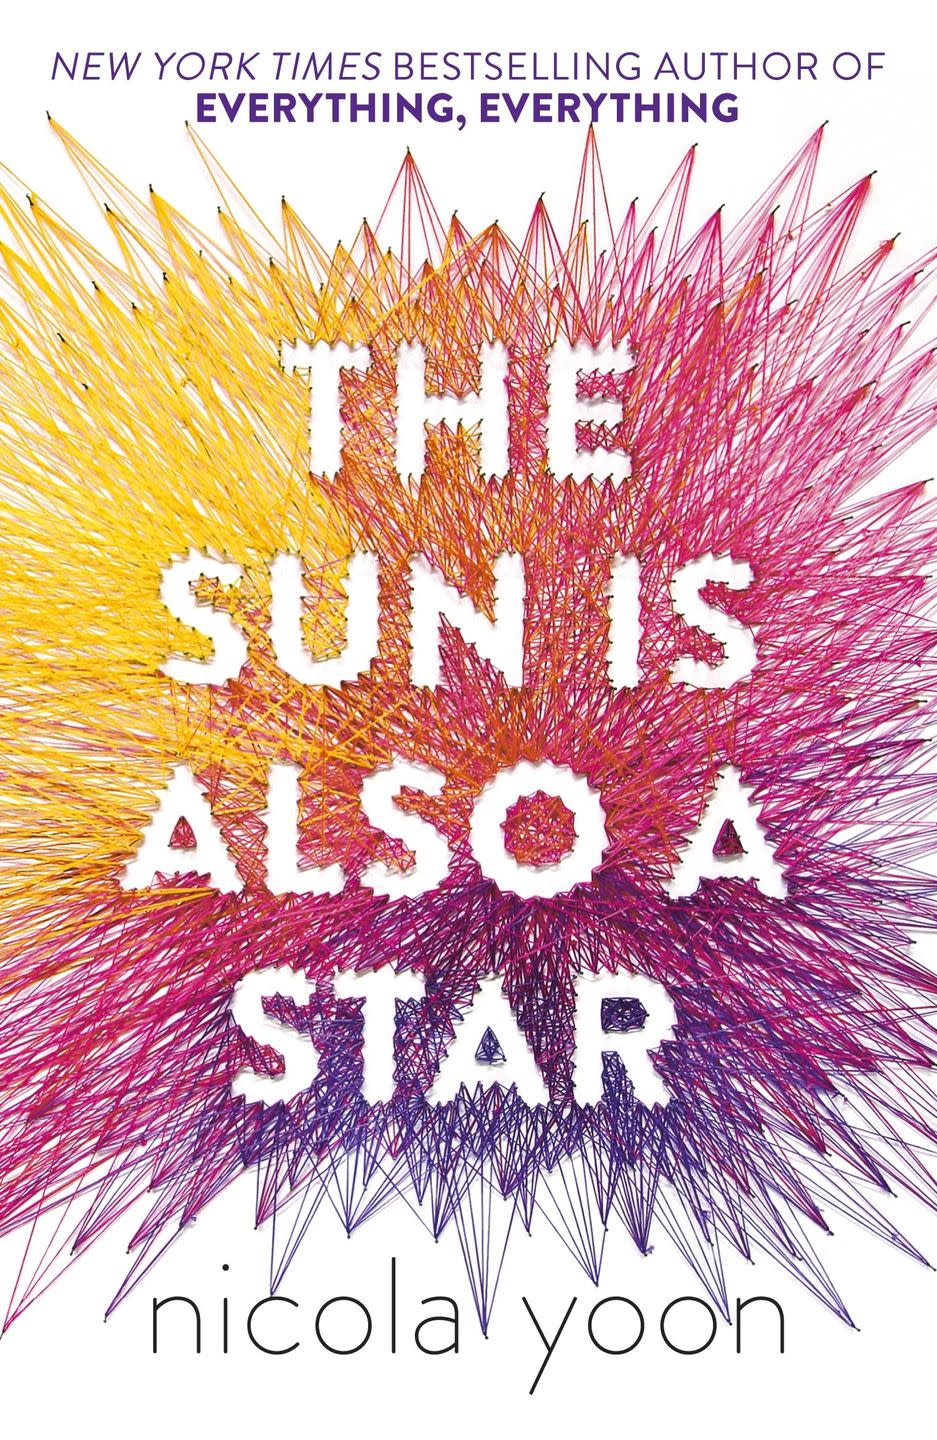 17) “The Sun is Also a Star” by Nicola Yoon